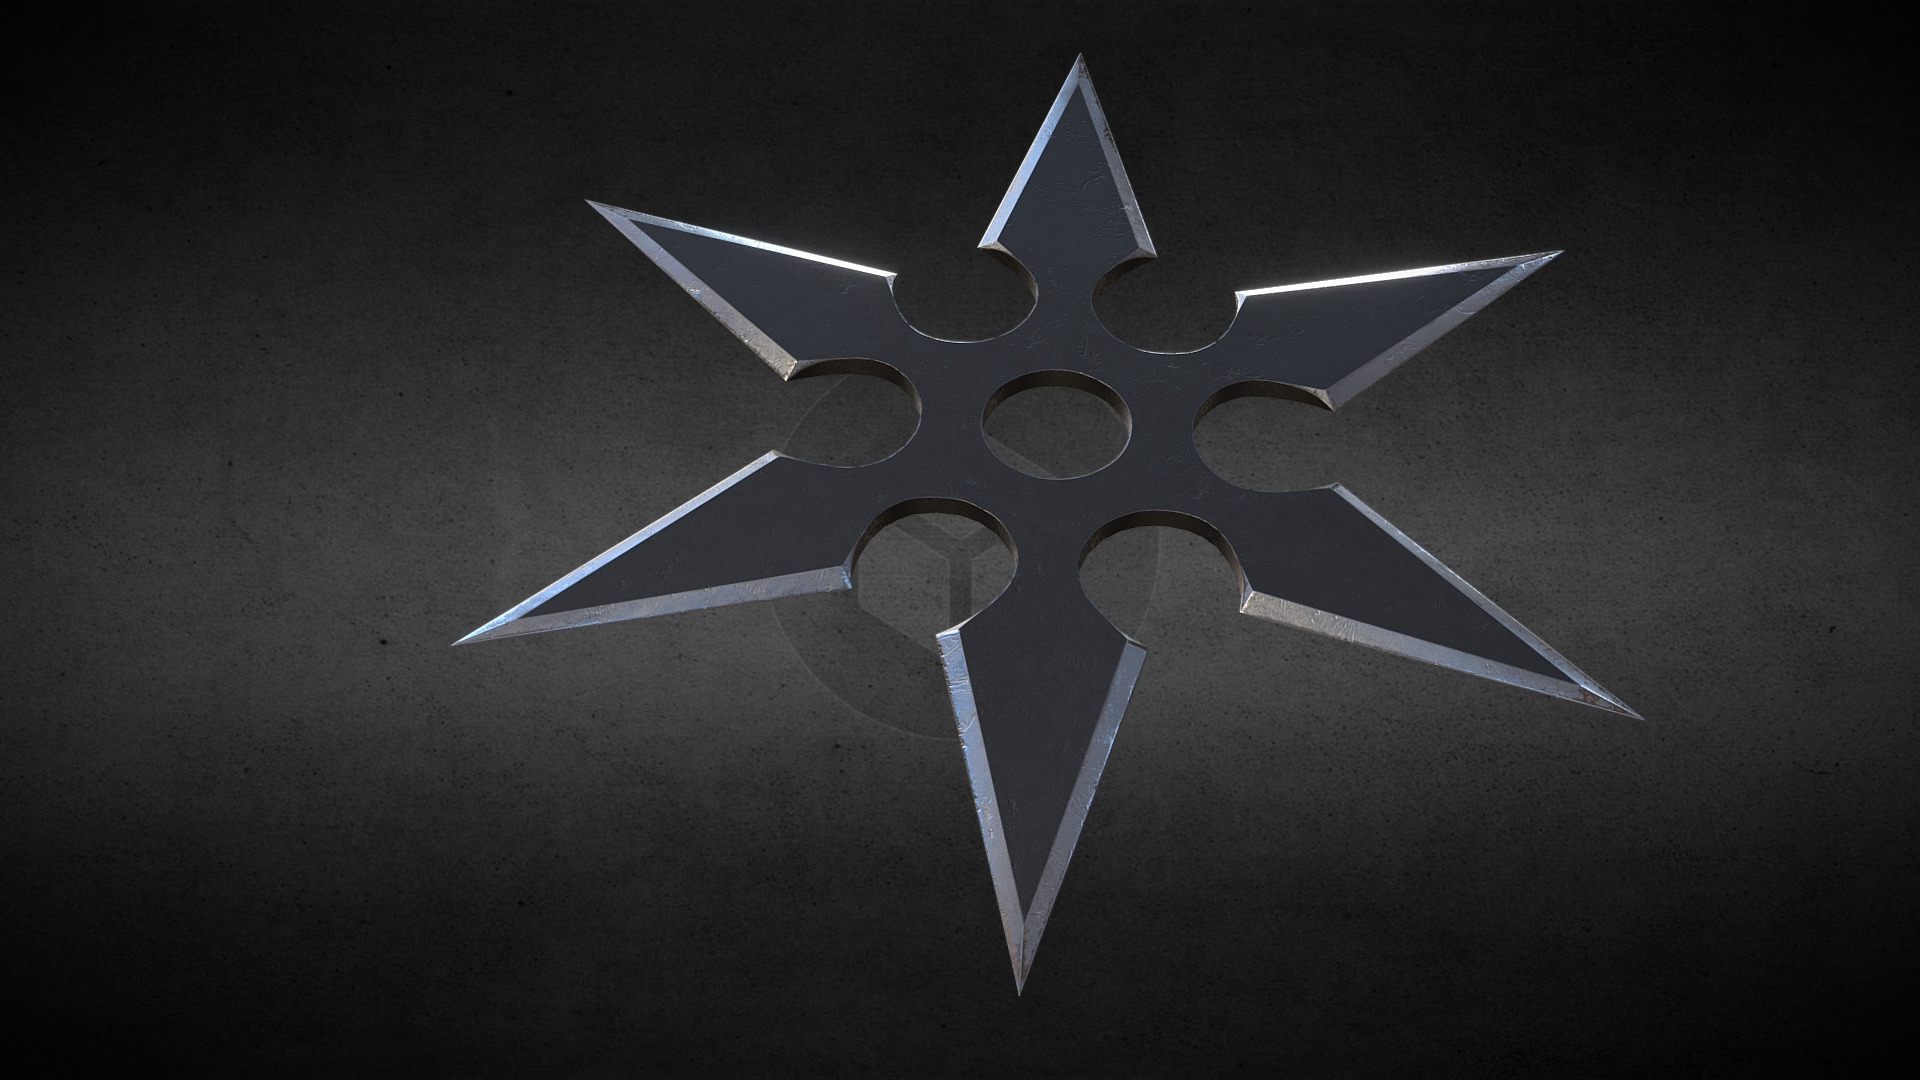 3D model Ninja’s Shuriken 1 - This is a 3D model of the Ninja's Shuriken 1. The 3D model is about a white star with a black background.